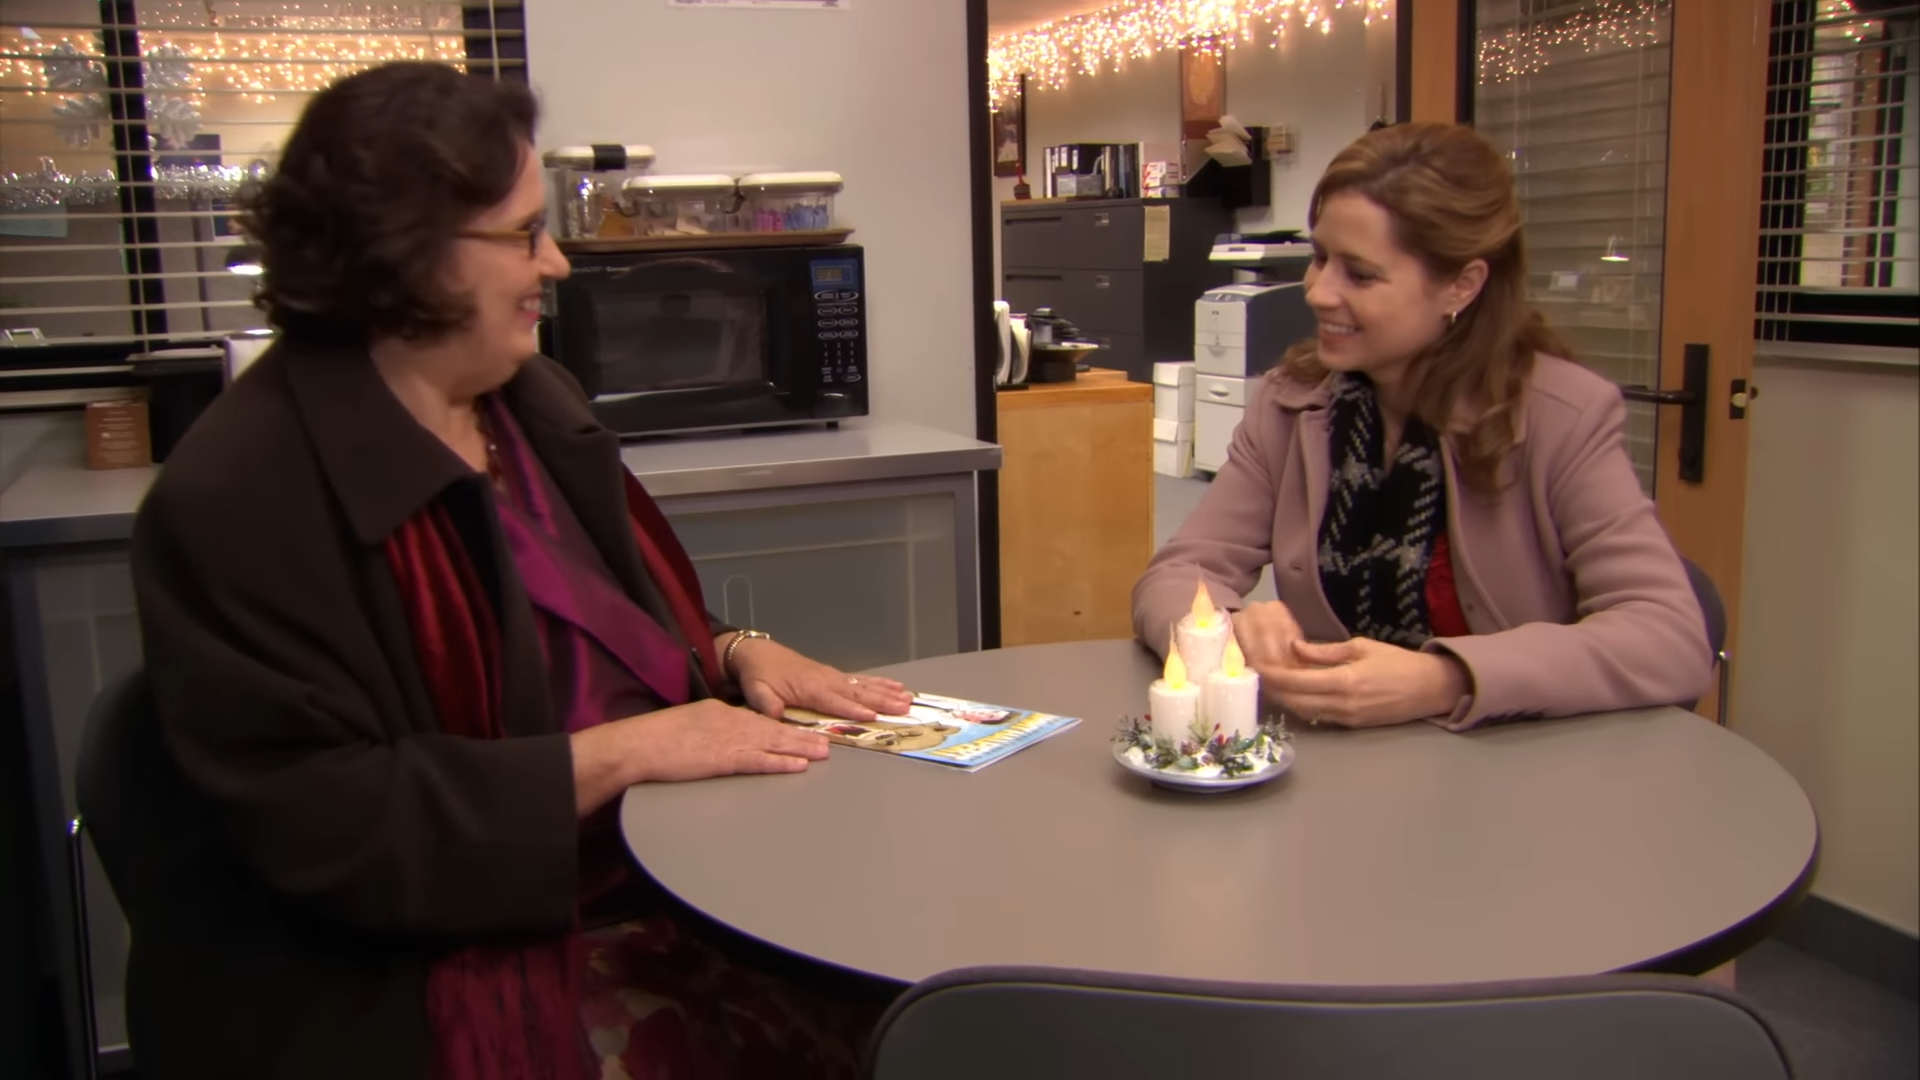 Pam and Phyllis from &quot;The Office&quot; are sitting together